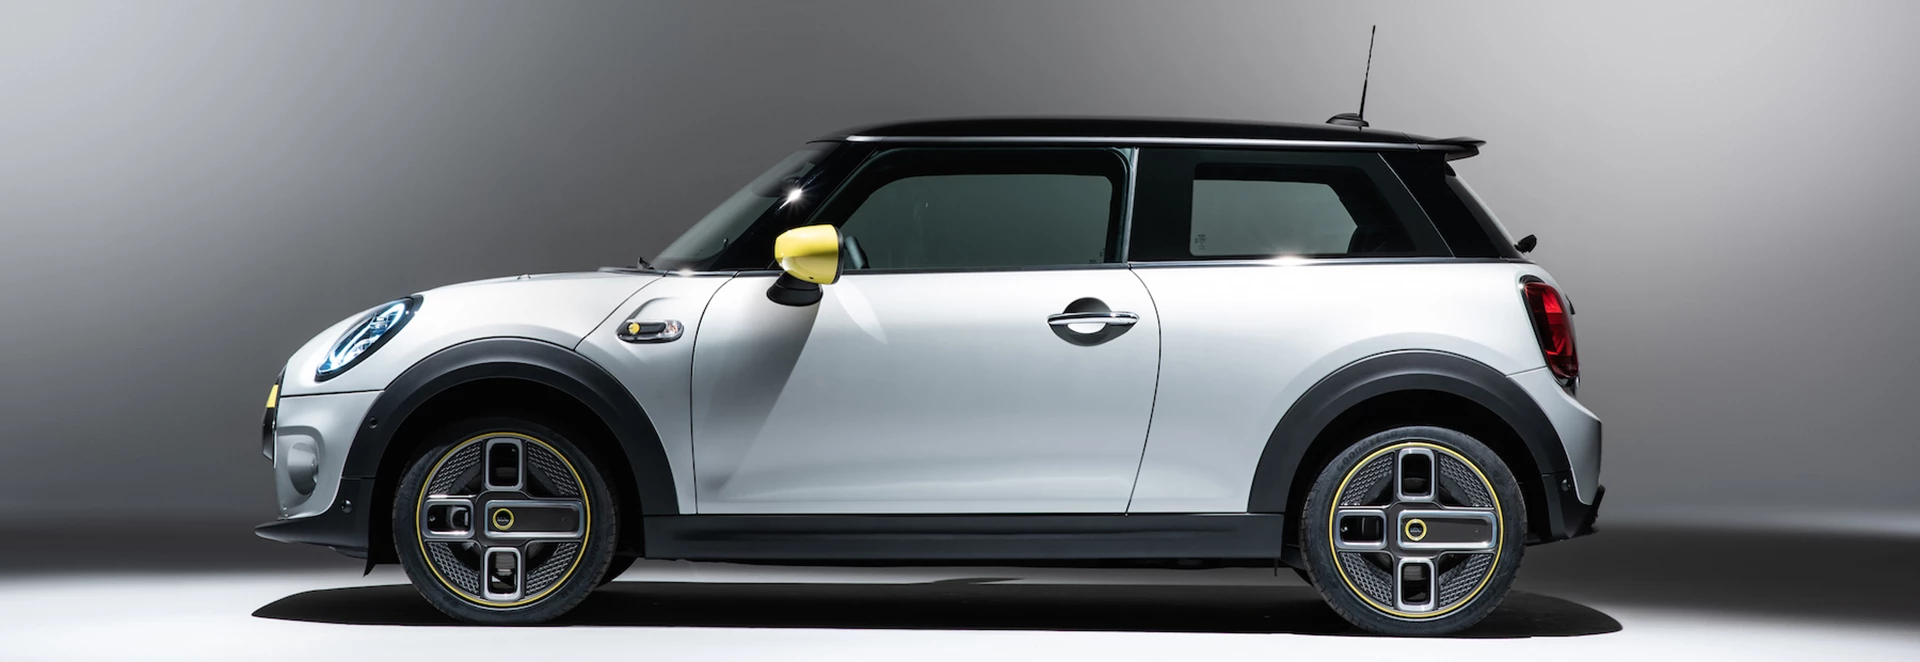 5 reasons why the MINI Electric is the EV we’ve been waiting for